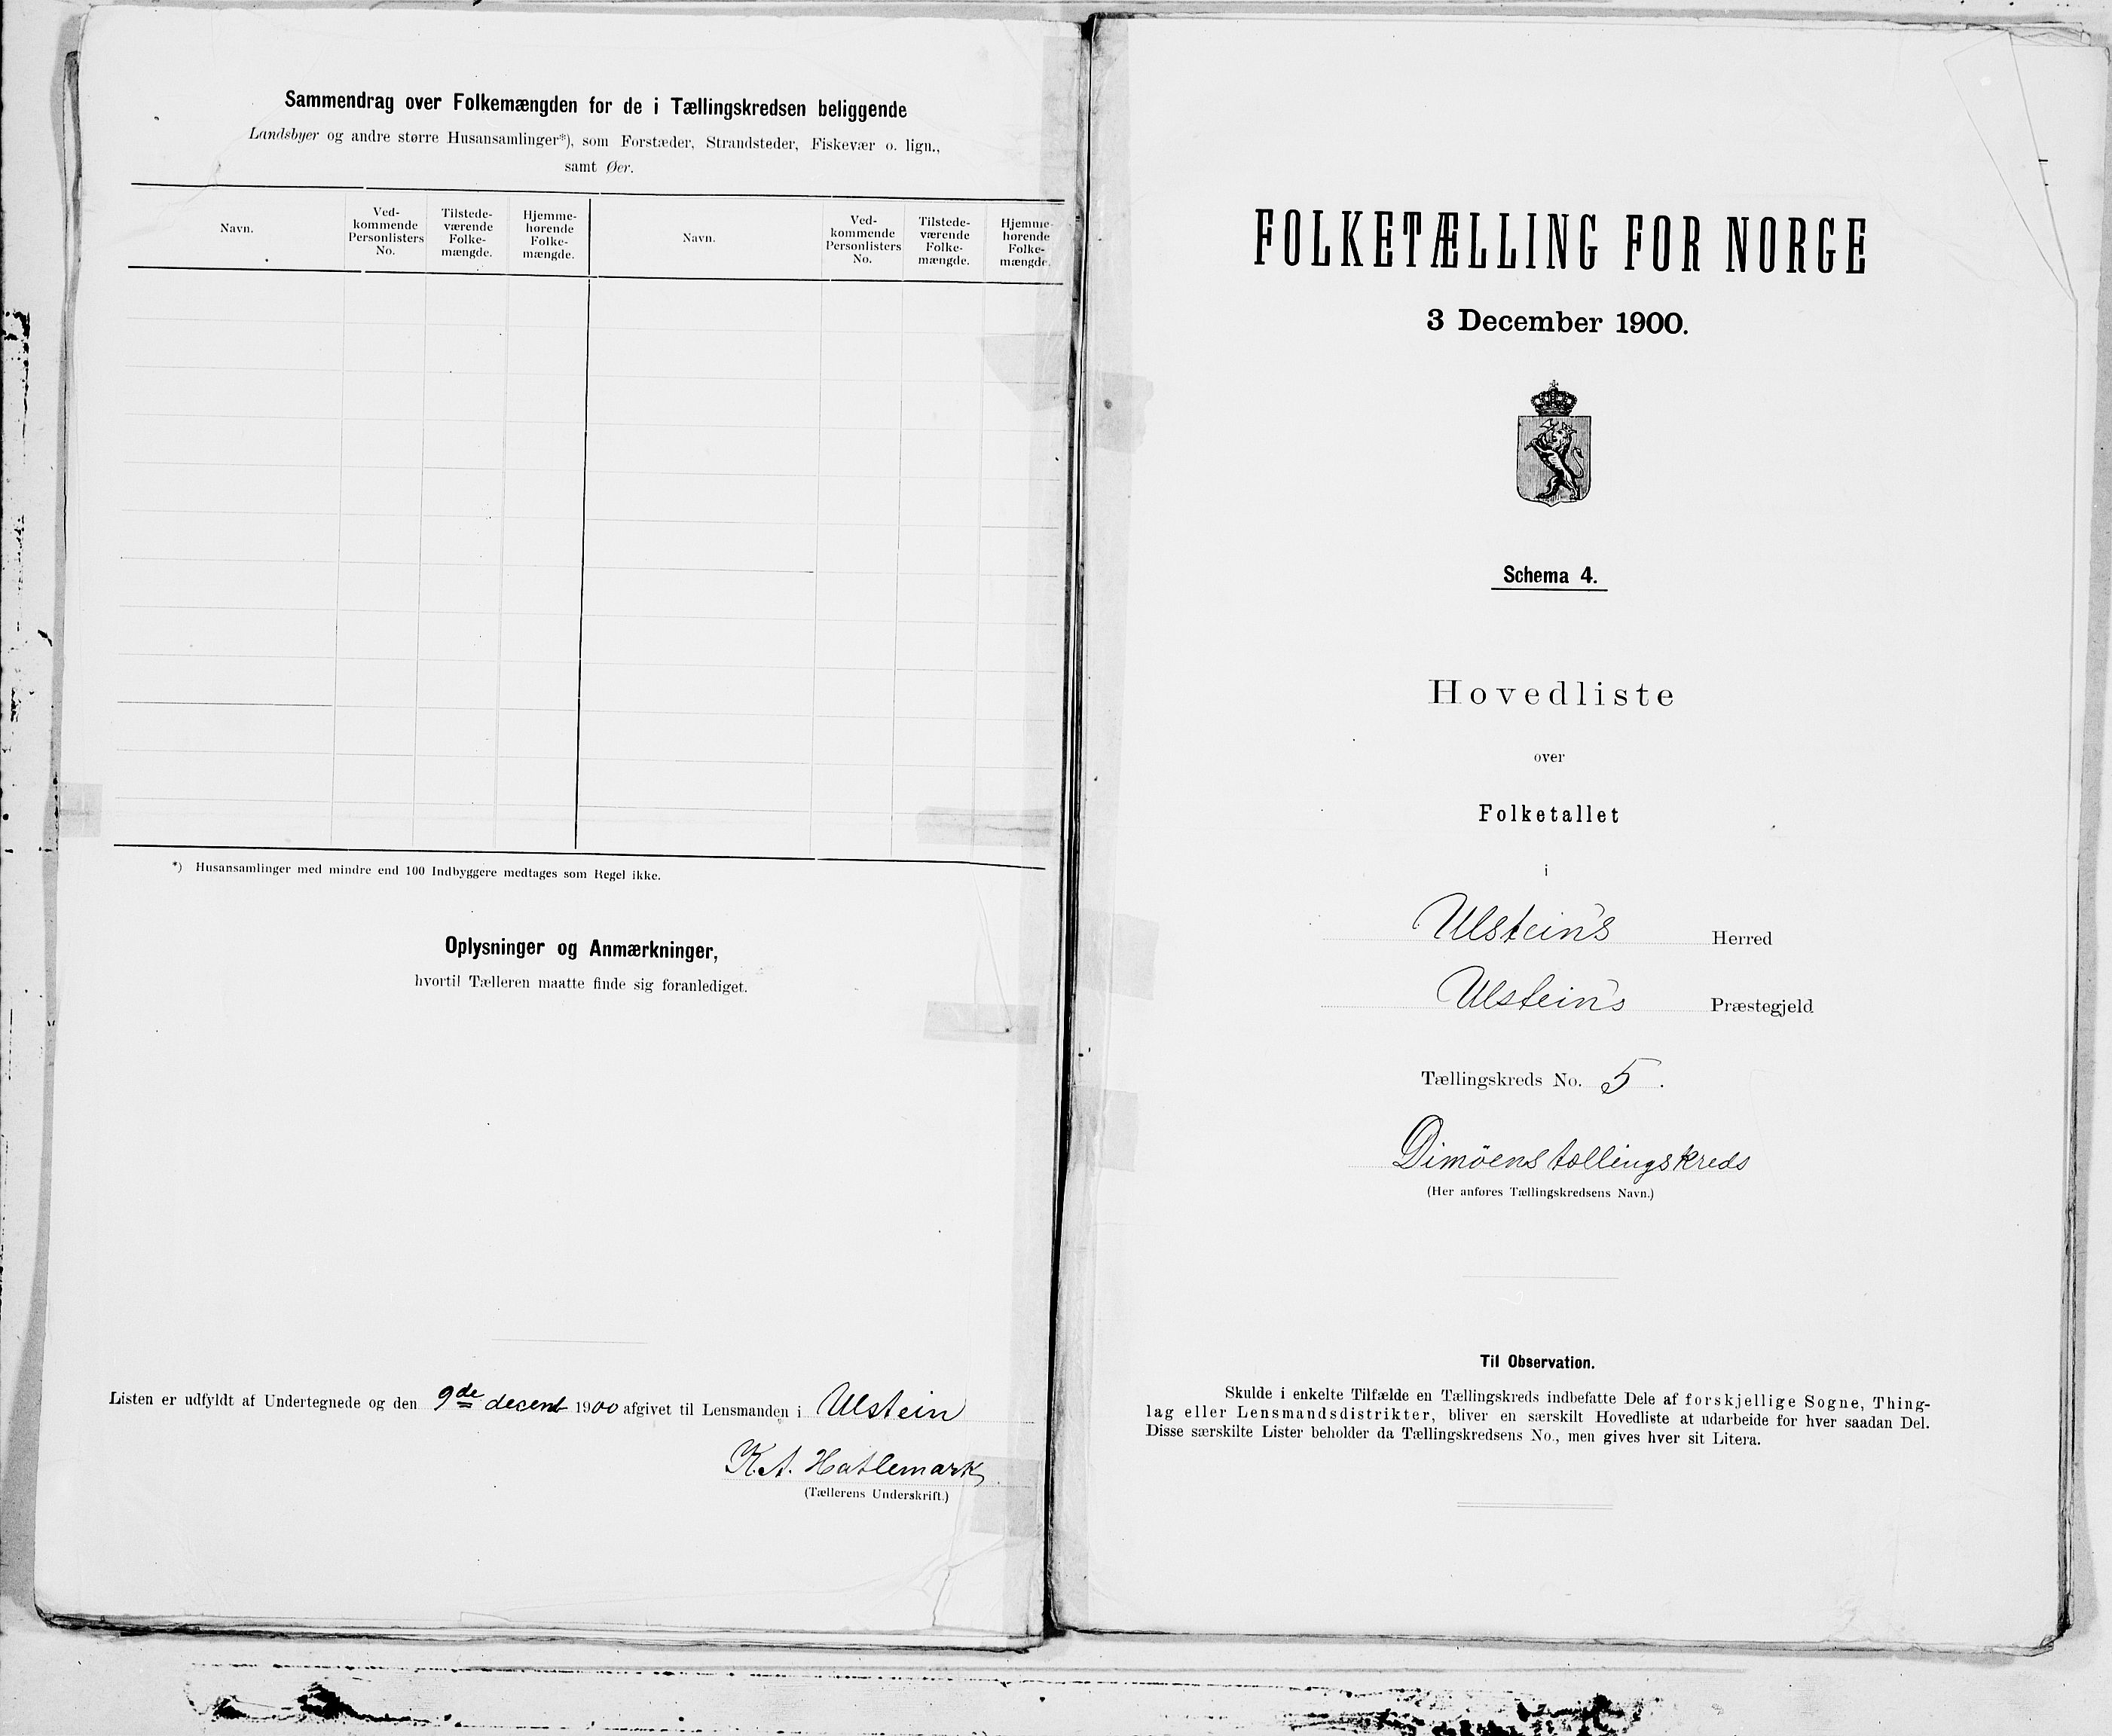 SAT, 1900 census for Ulstein, 1900, p. 10